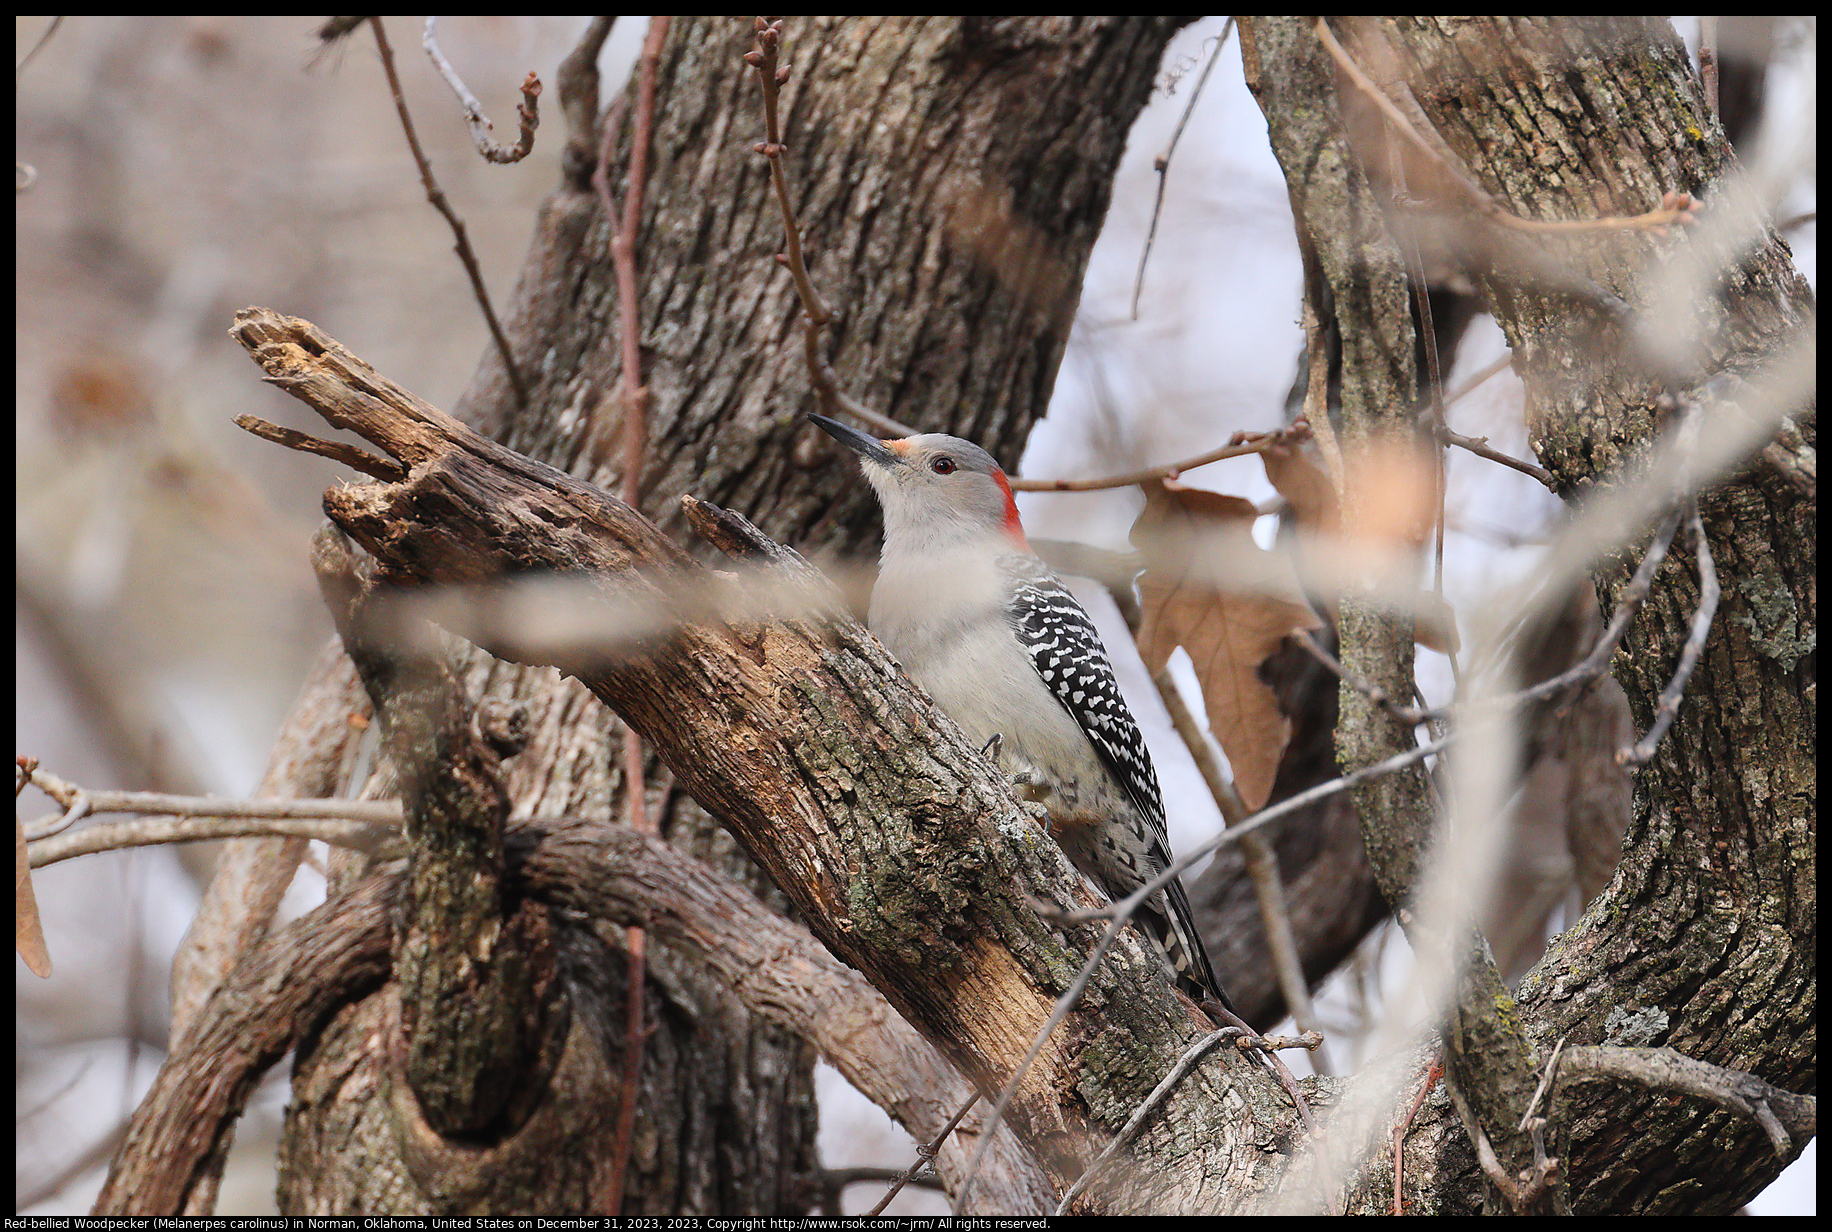 Red-bellied Woodpecker (Melanerpes carolinus) in Norman, Oklahoma, United States on December 31, 2023